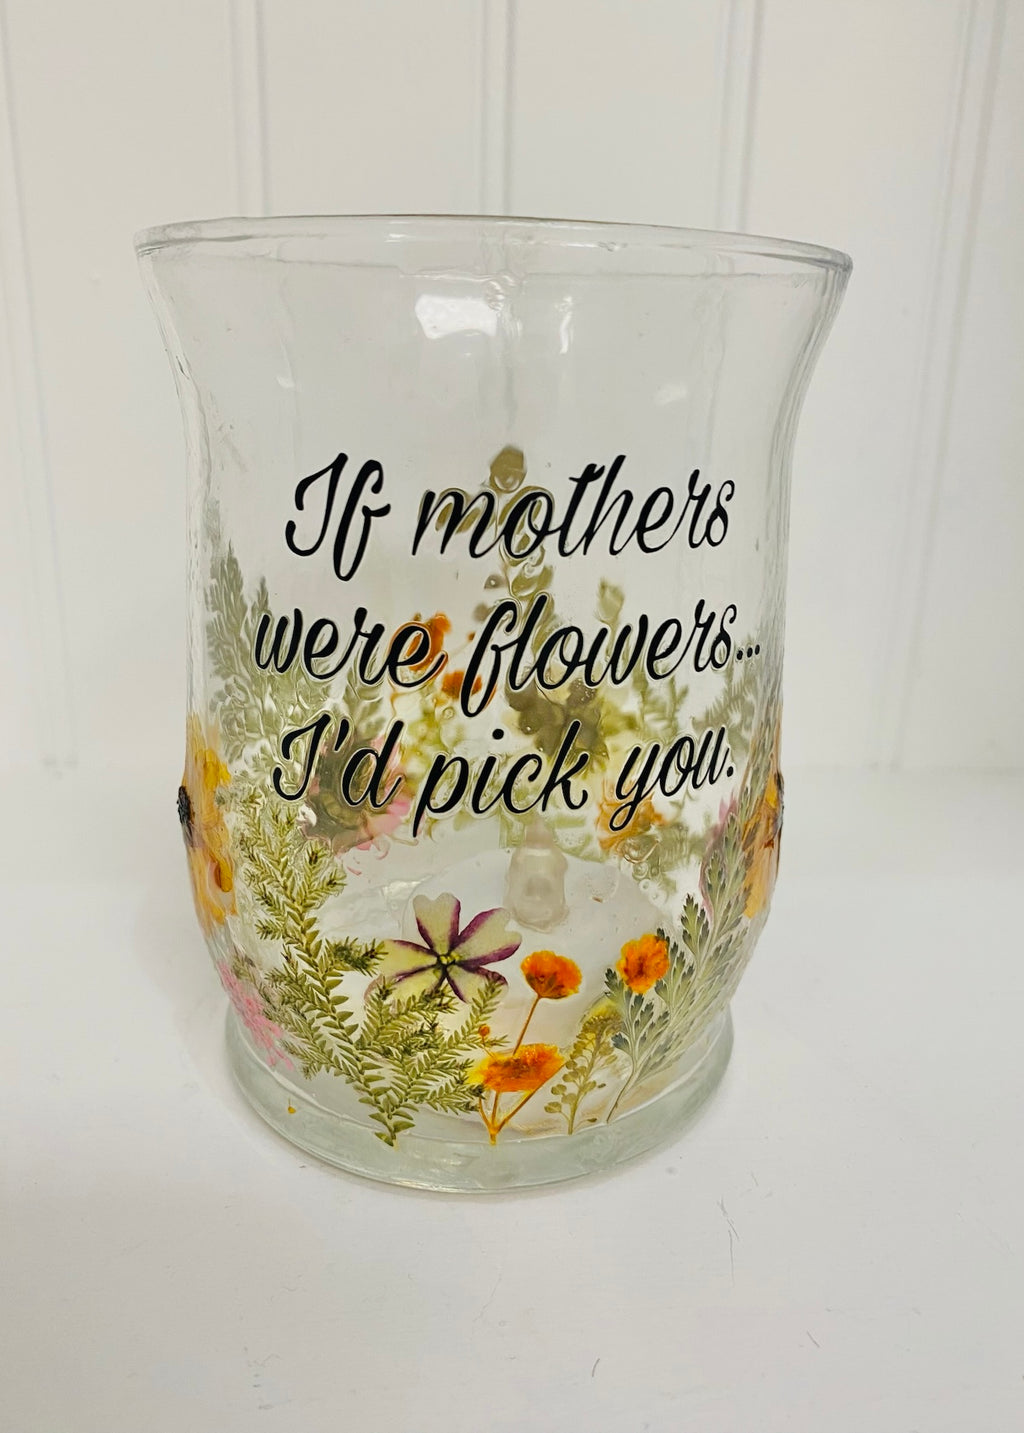 If Mothers were flowers, I'd pick you  vase